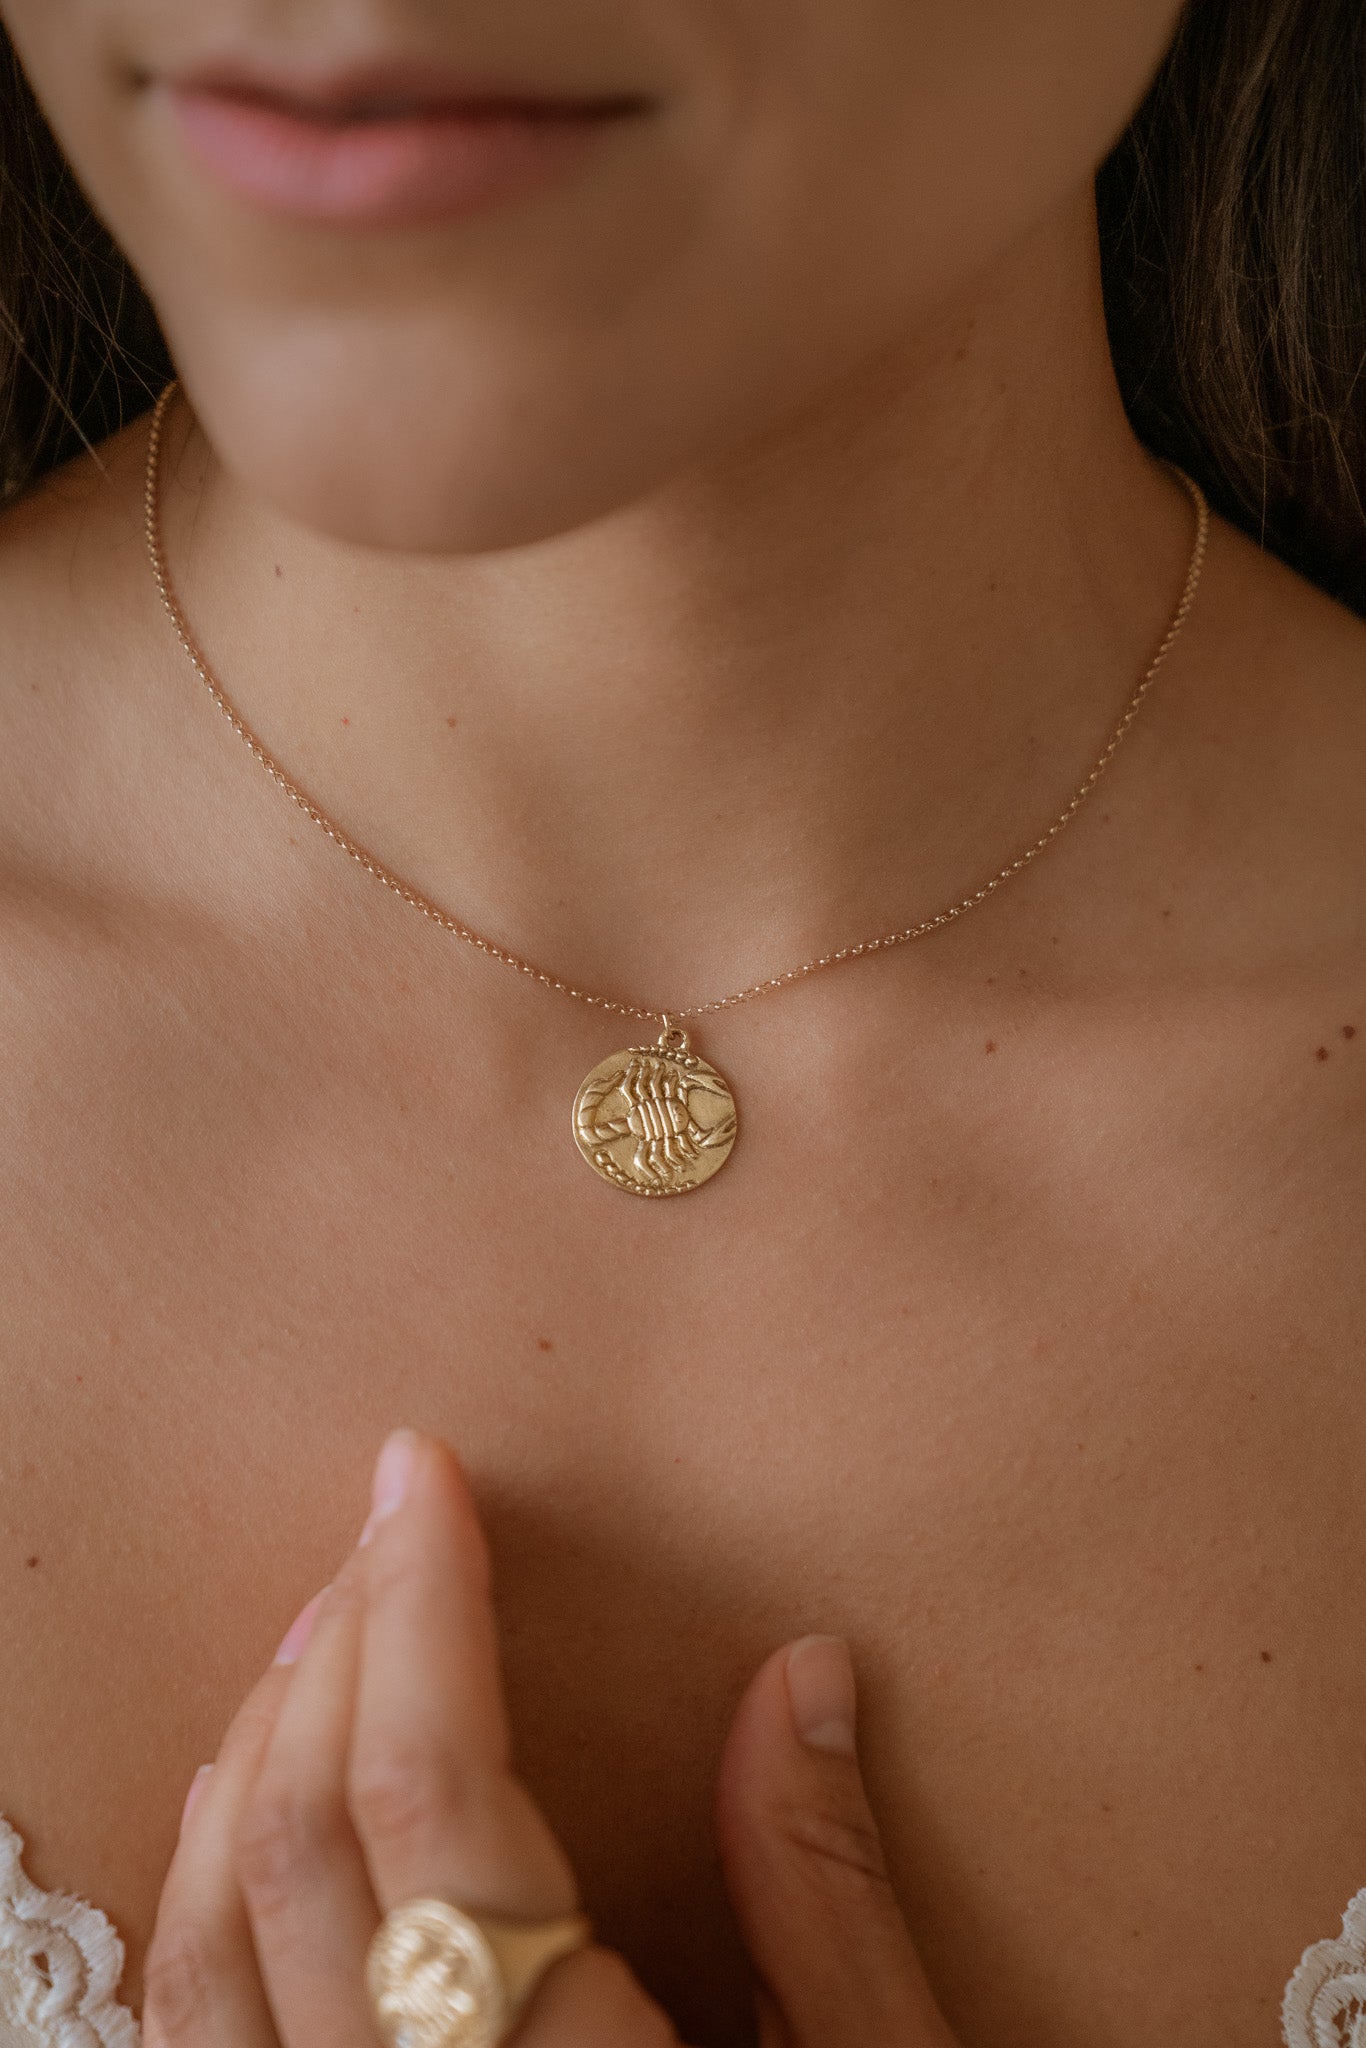 The eighth sign of the Zodiac, water sign Scorpio is a passionate truth-seeker who leads with decisiveness. A hand-carved, fierce yet whimsical scorpion graces this pendant, creating a necklace that captures the power of the celestial sky.